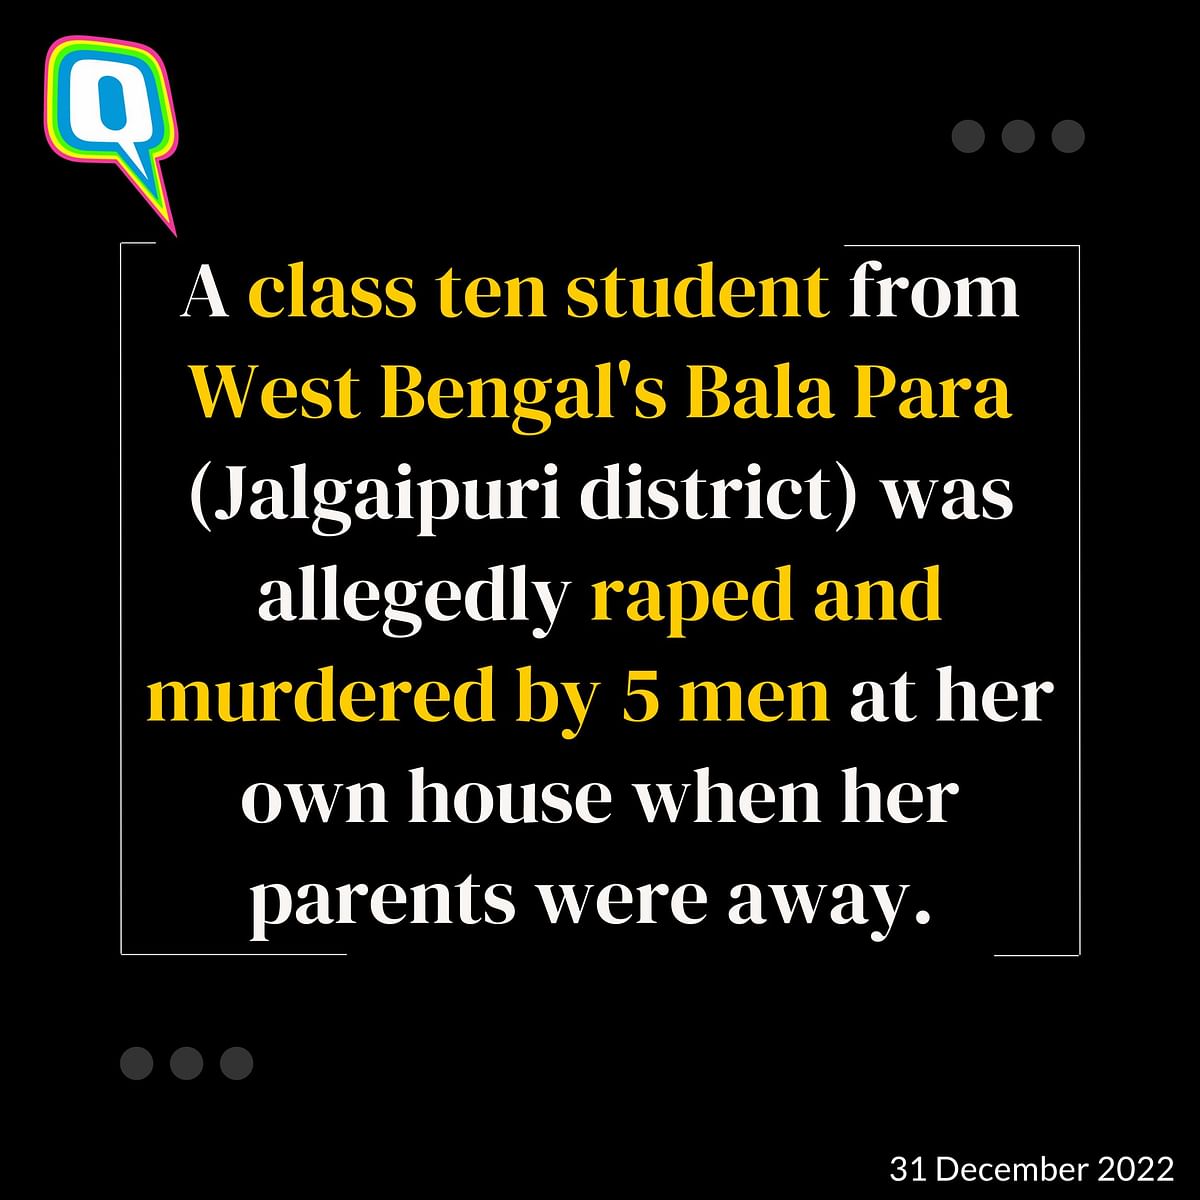 Not Besharam Rang, these incidents should bother us.